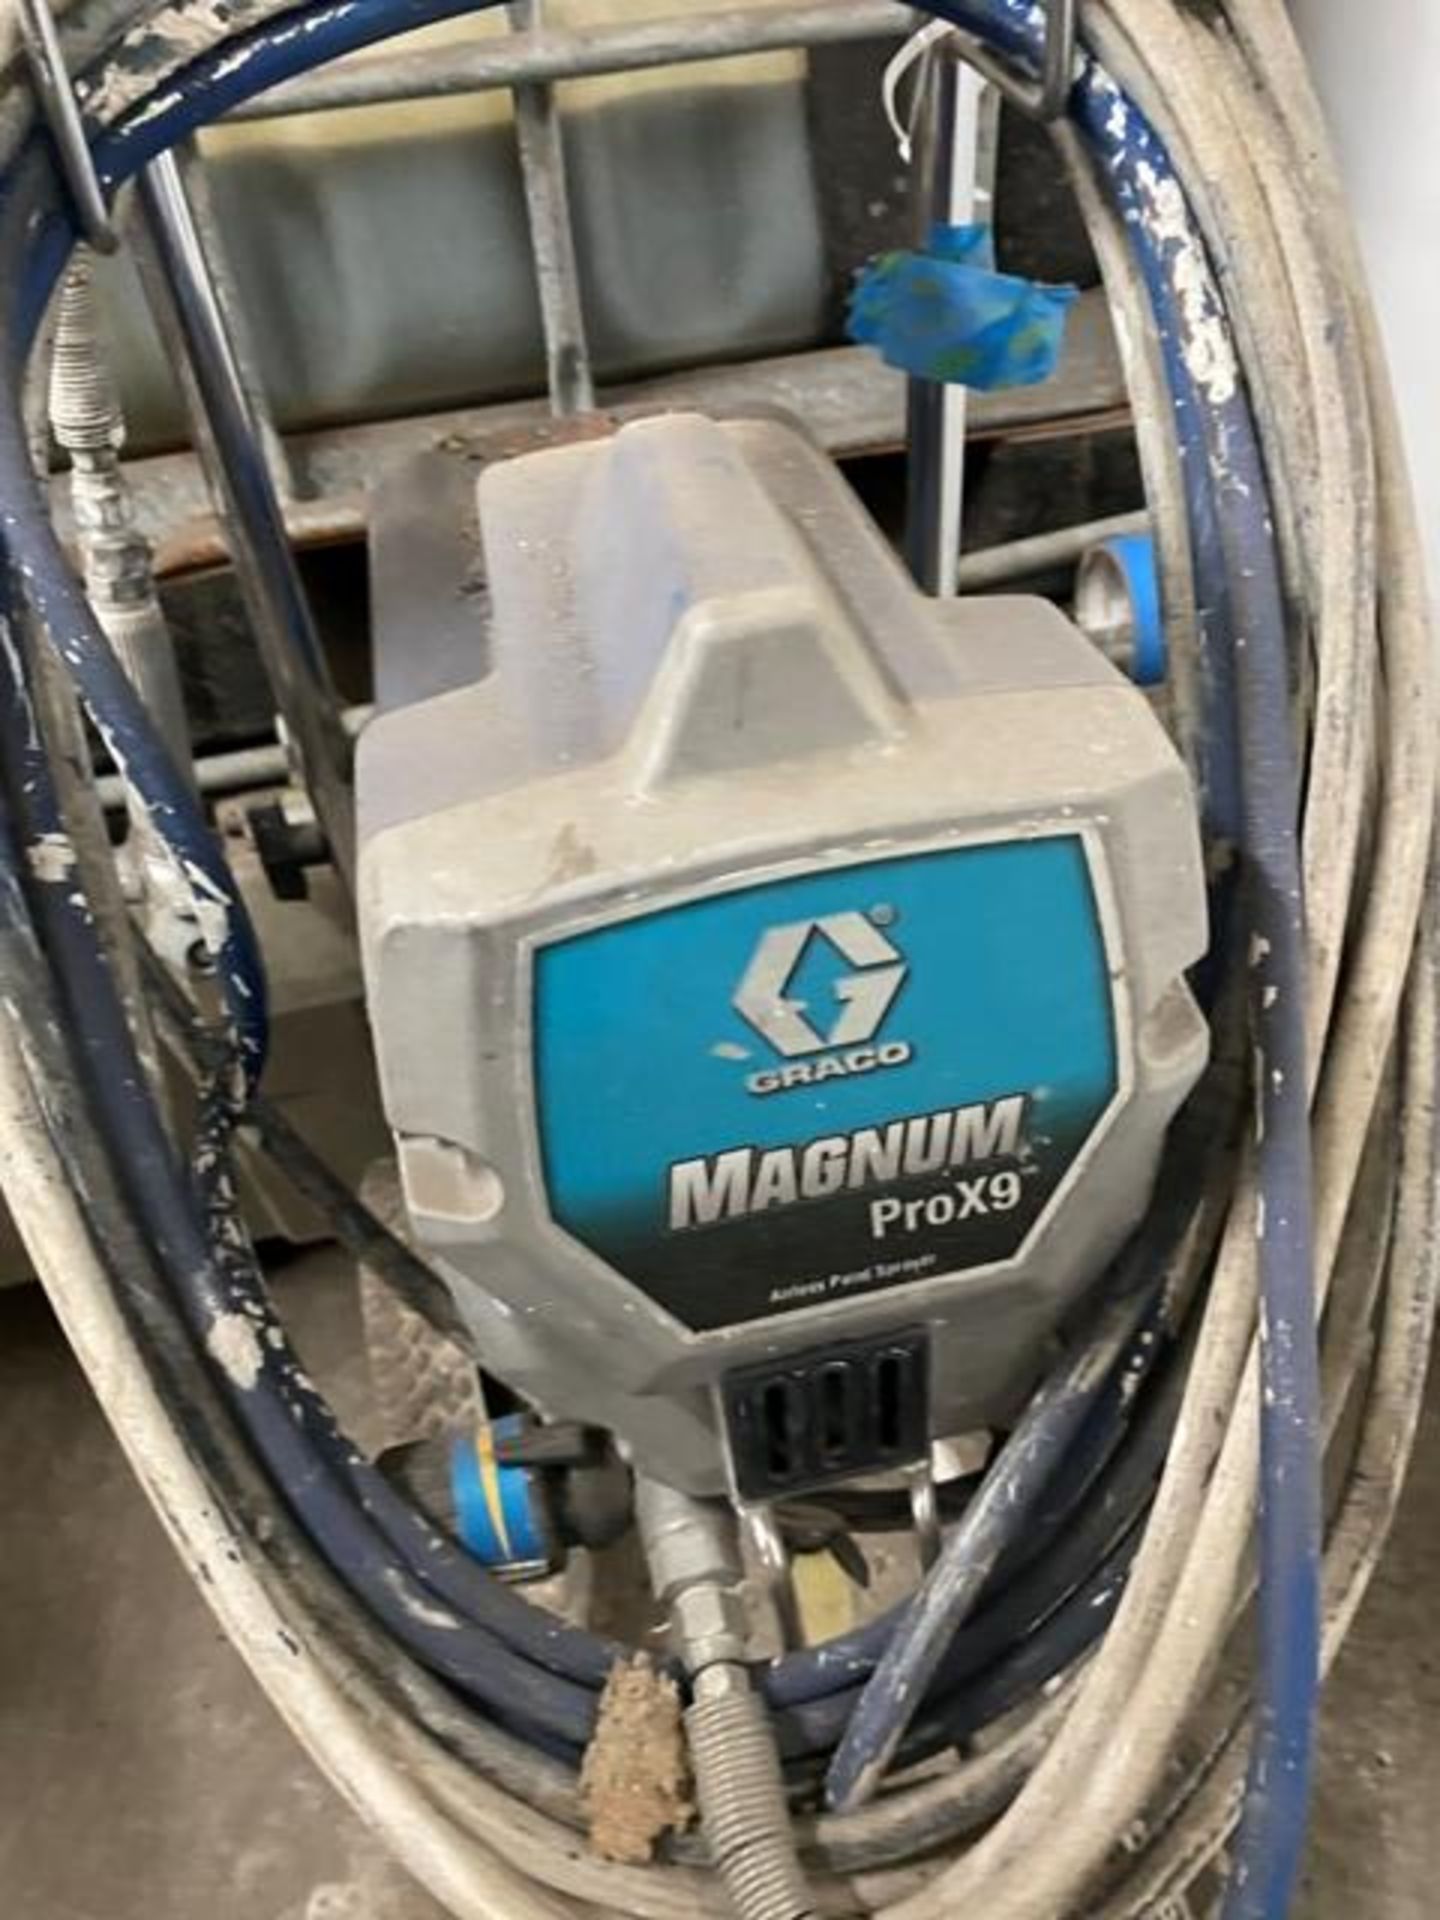 Graco Magnum Pro X9 Airless Paint Sprayer Rigging Price $25 - Image 2 of 3